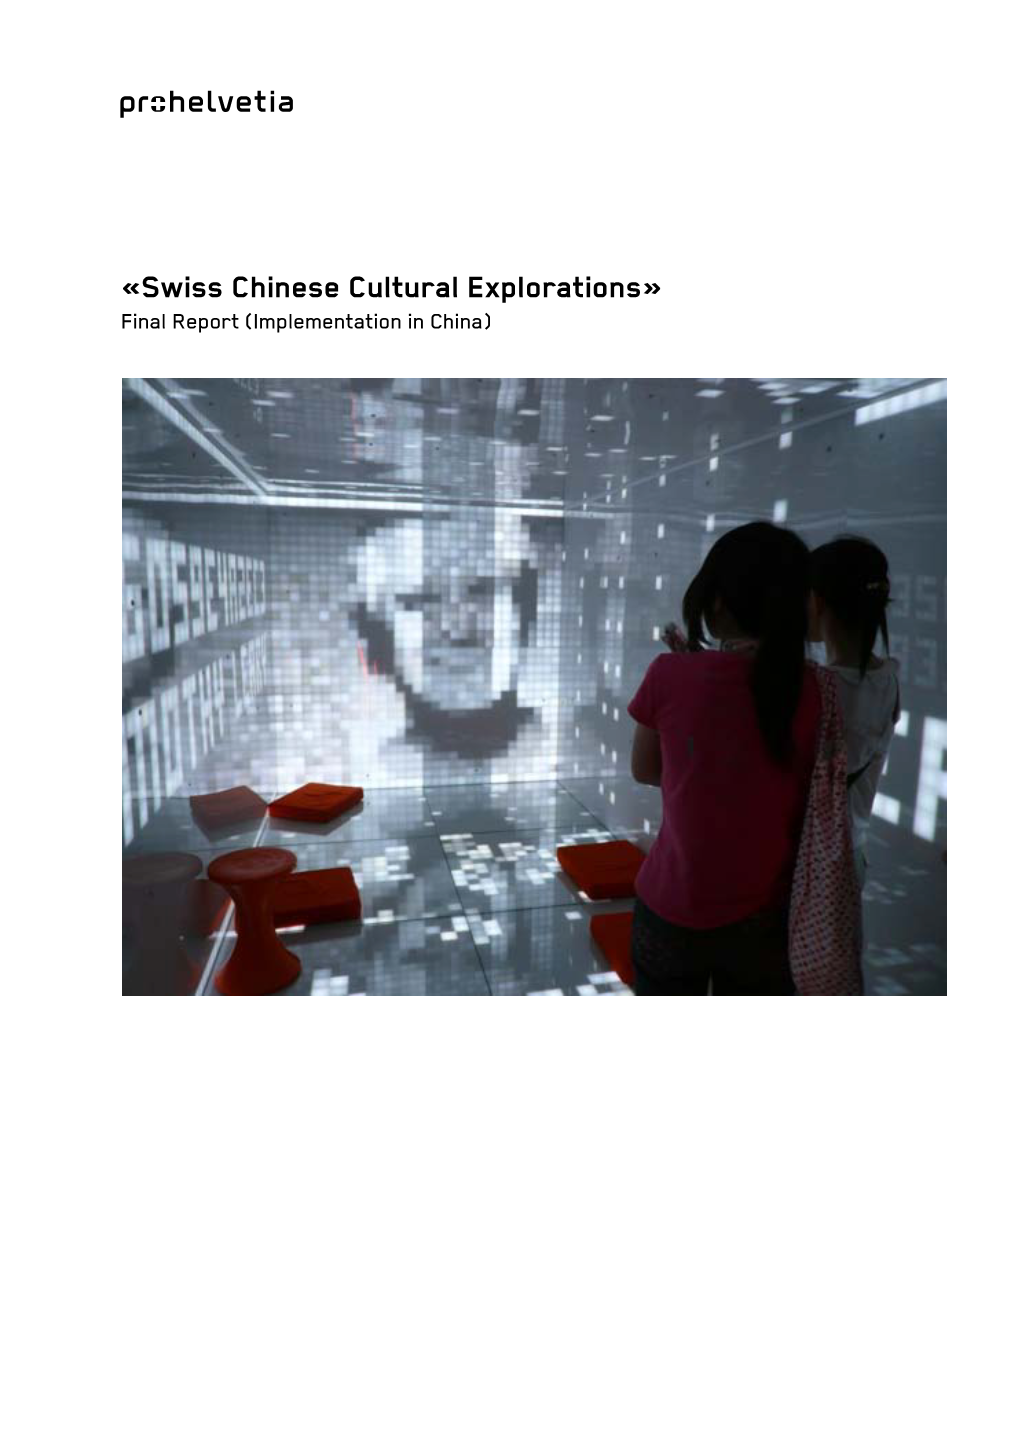 Swiss Chinese Cultural Explorations» Final Report (Implementation in China)